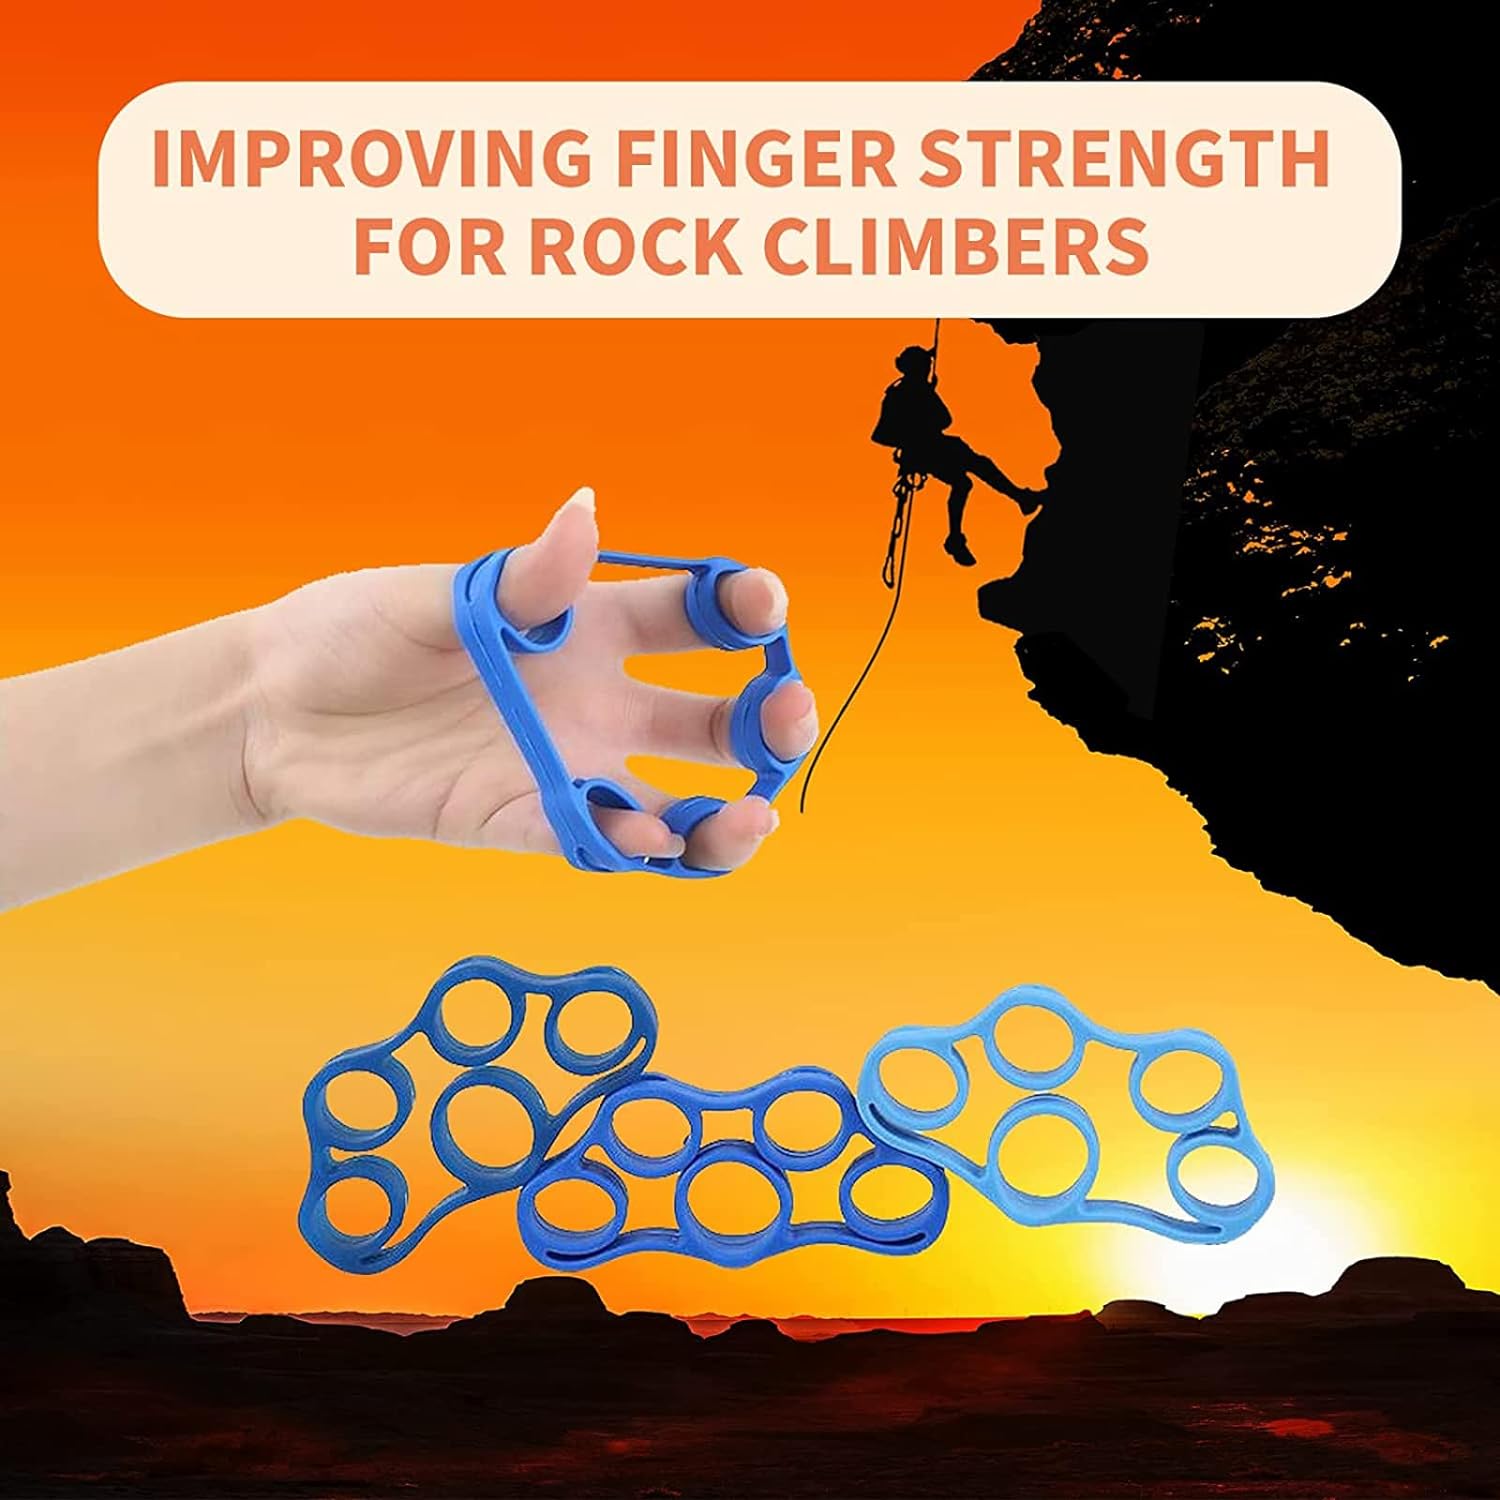 Finger Exerciser, Hand Grip Strengthener, New Material,Forearm Grip Workout, Finger Stretcher, Relieve Wrist Pain, Carpal Tunnel